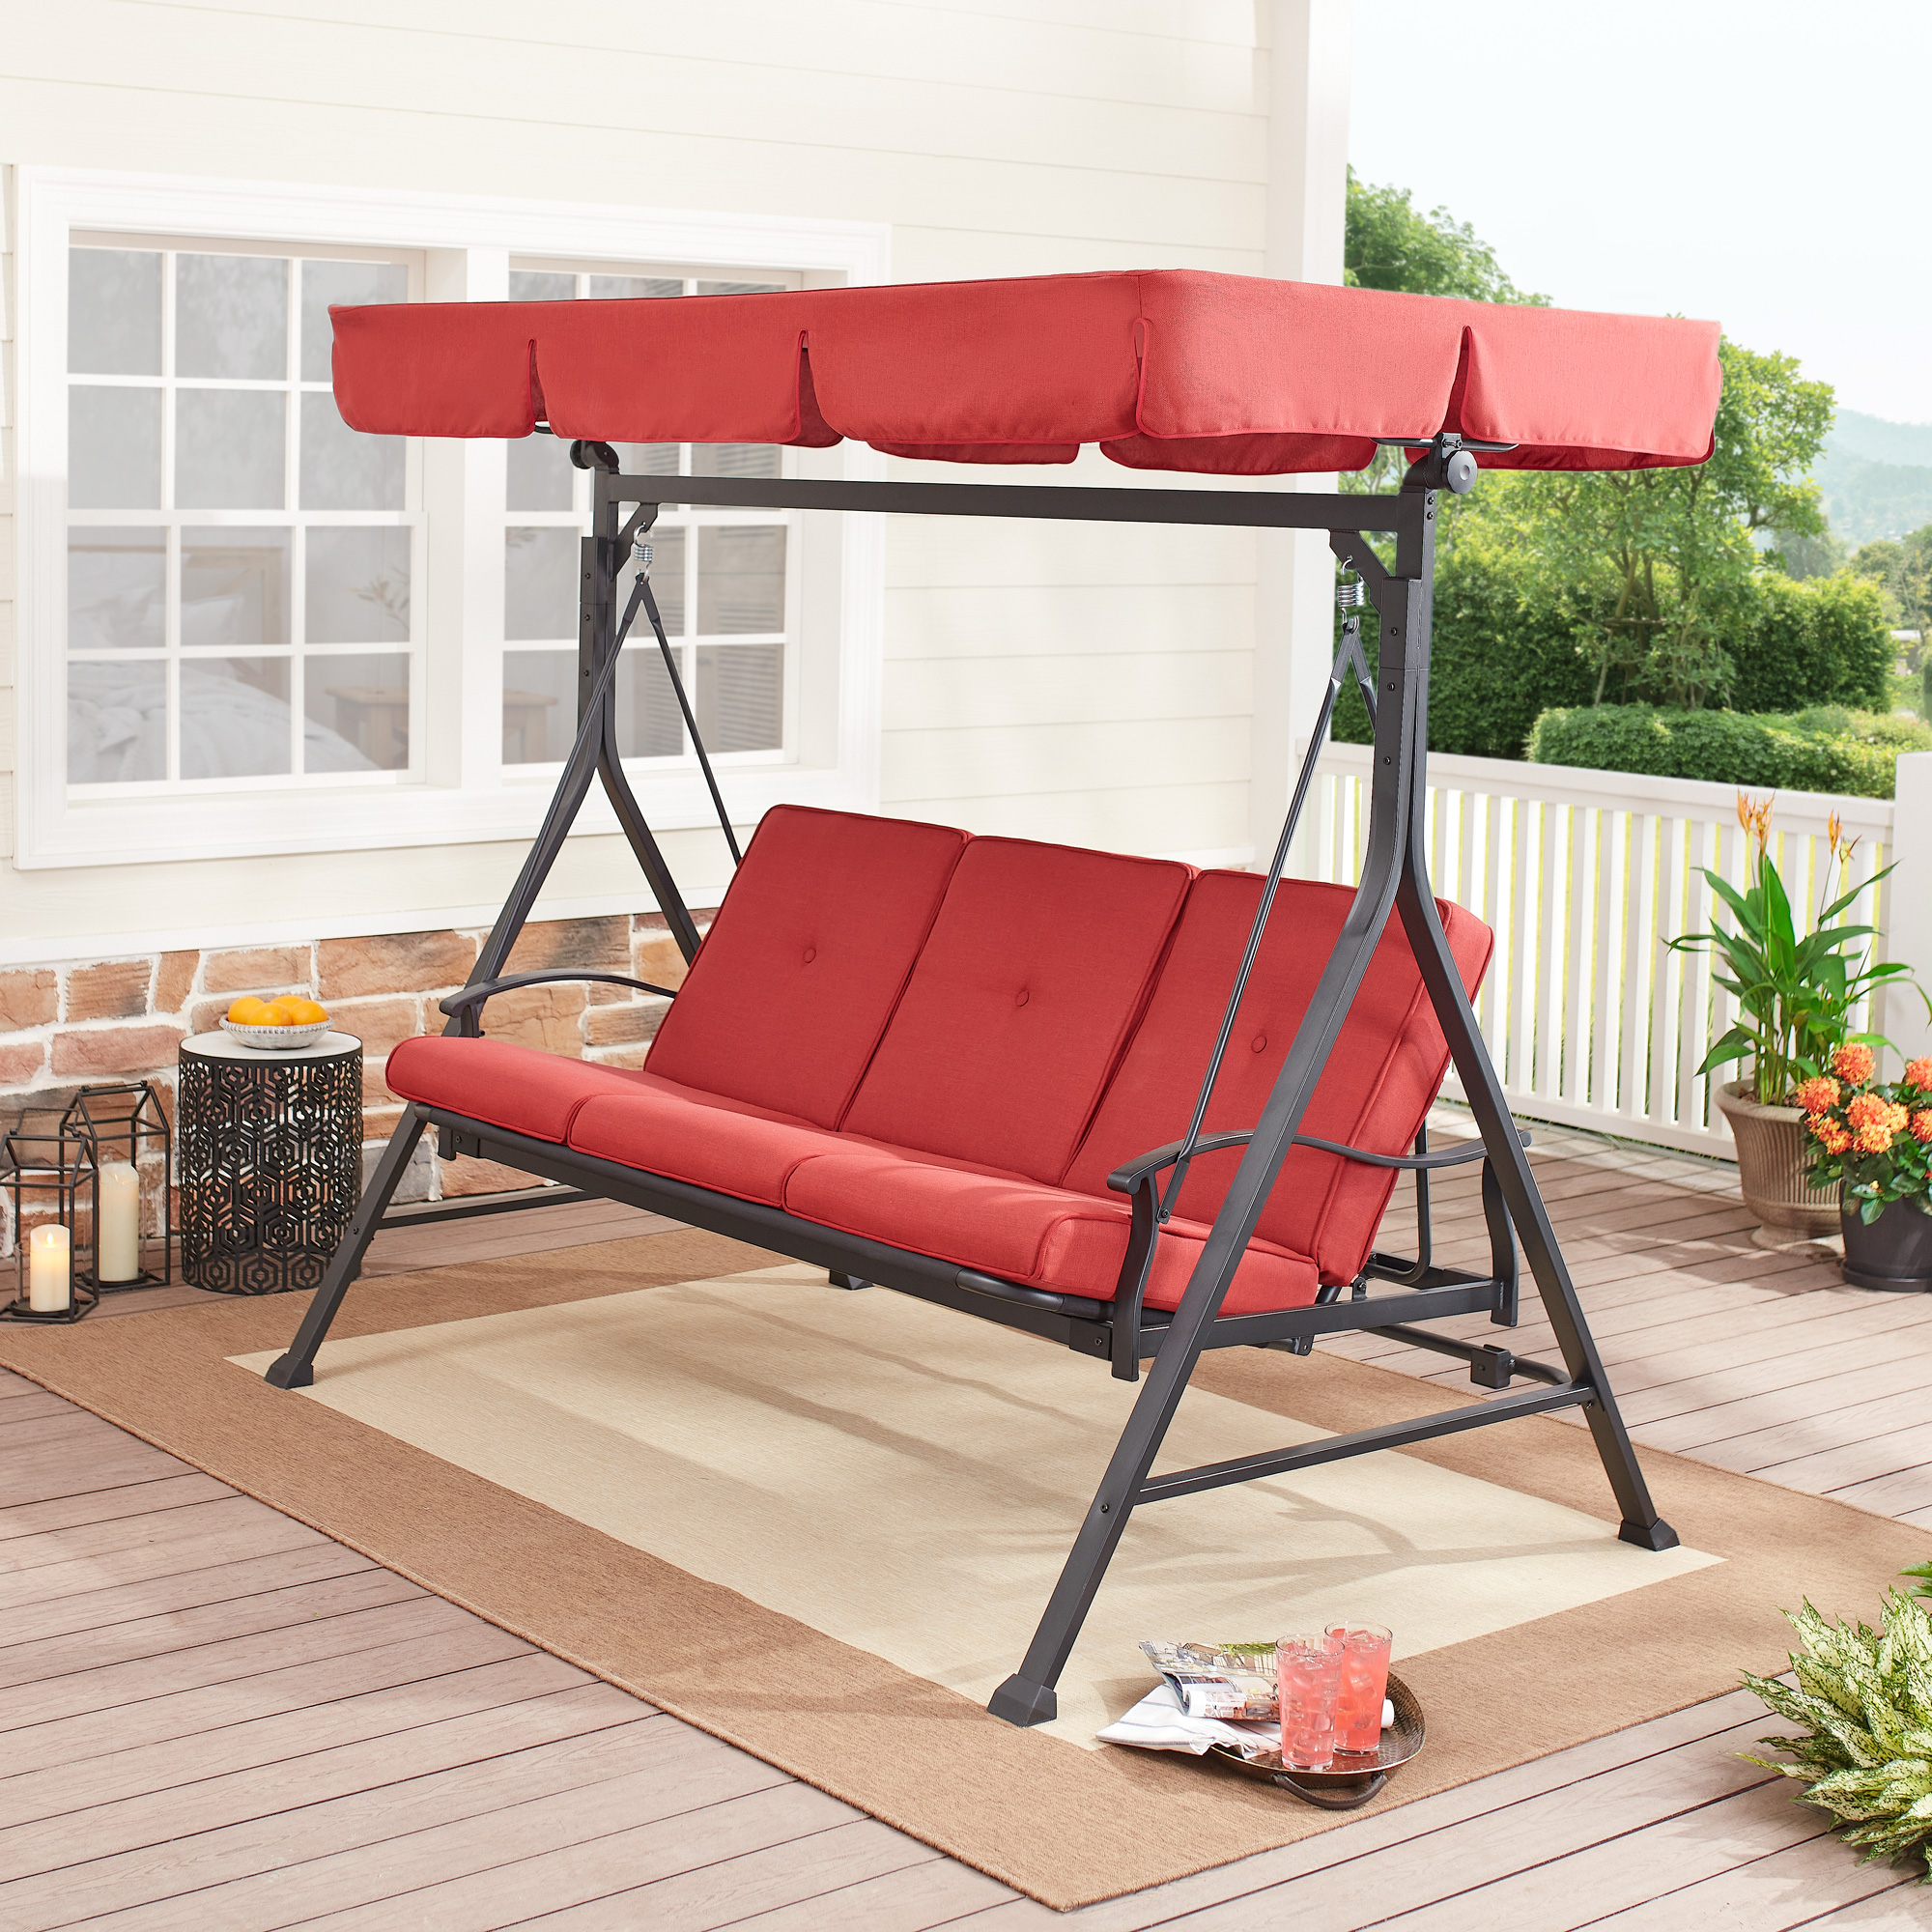 Mainstays Callimont 3 Person Steel Porch Swing - Red/Black - image 1 of 14